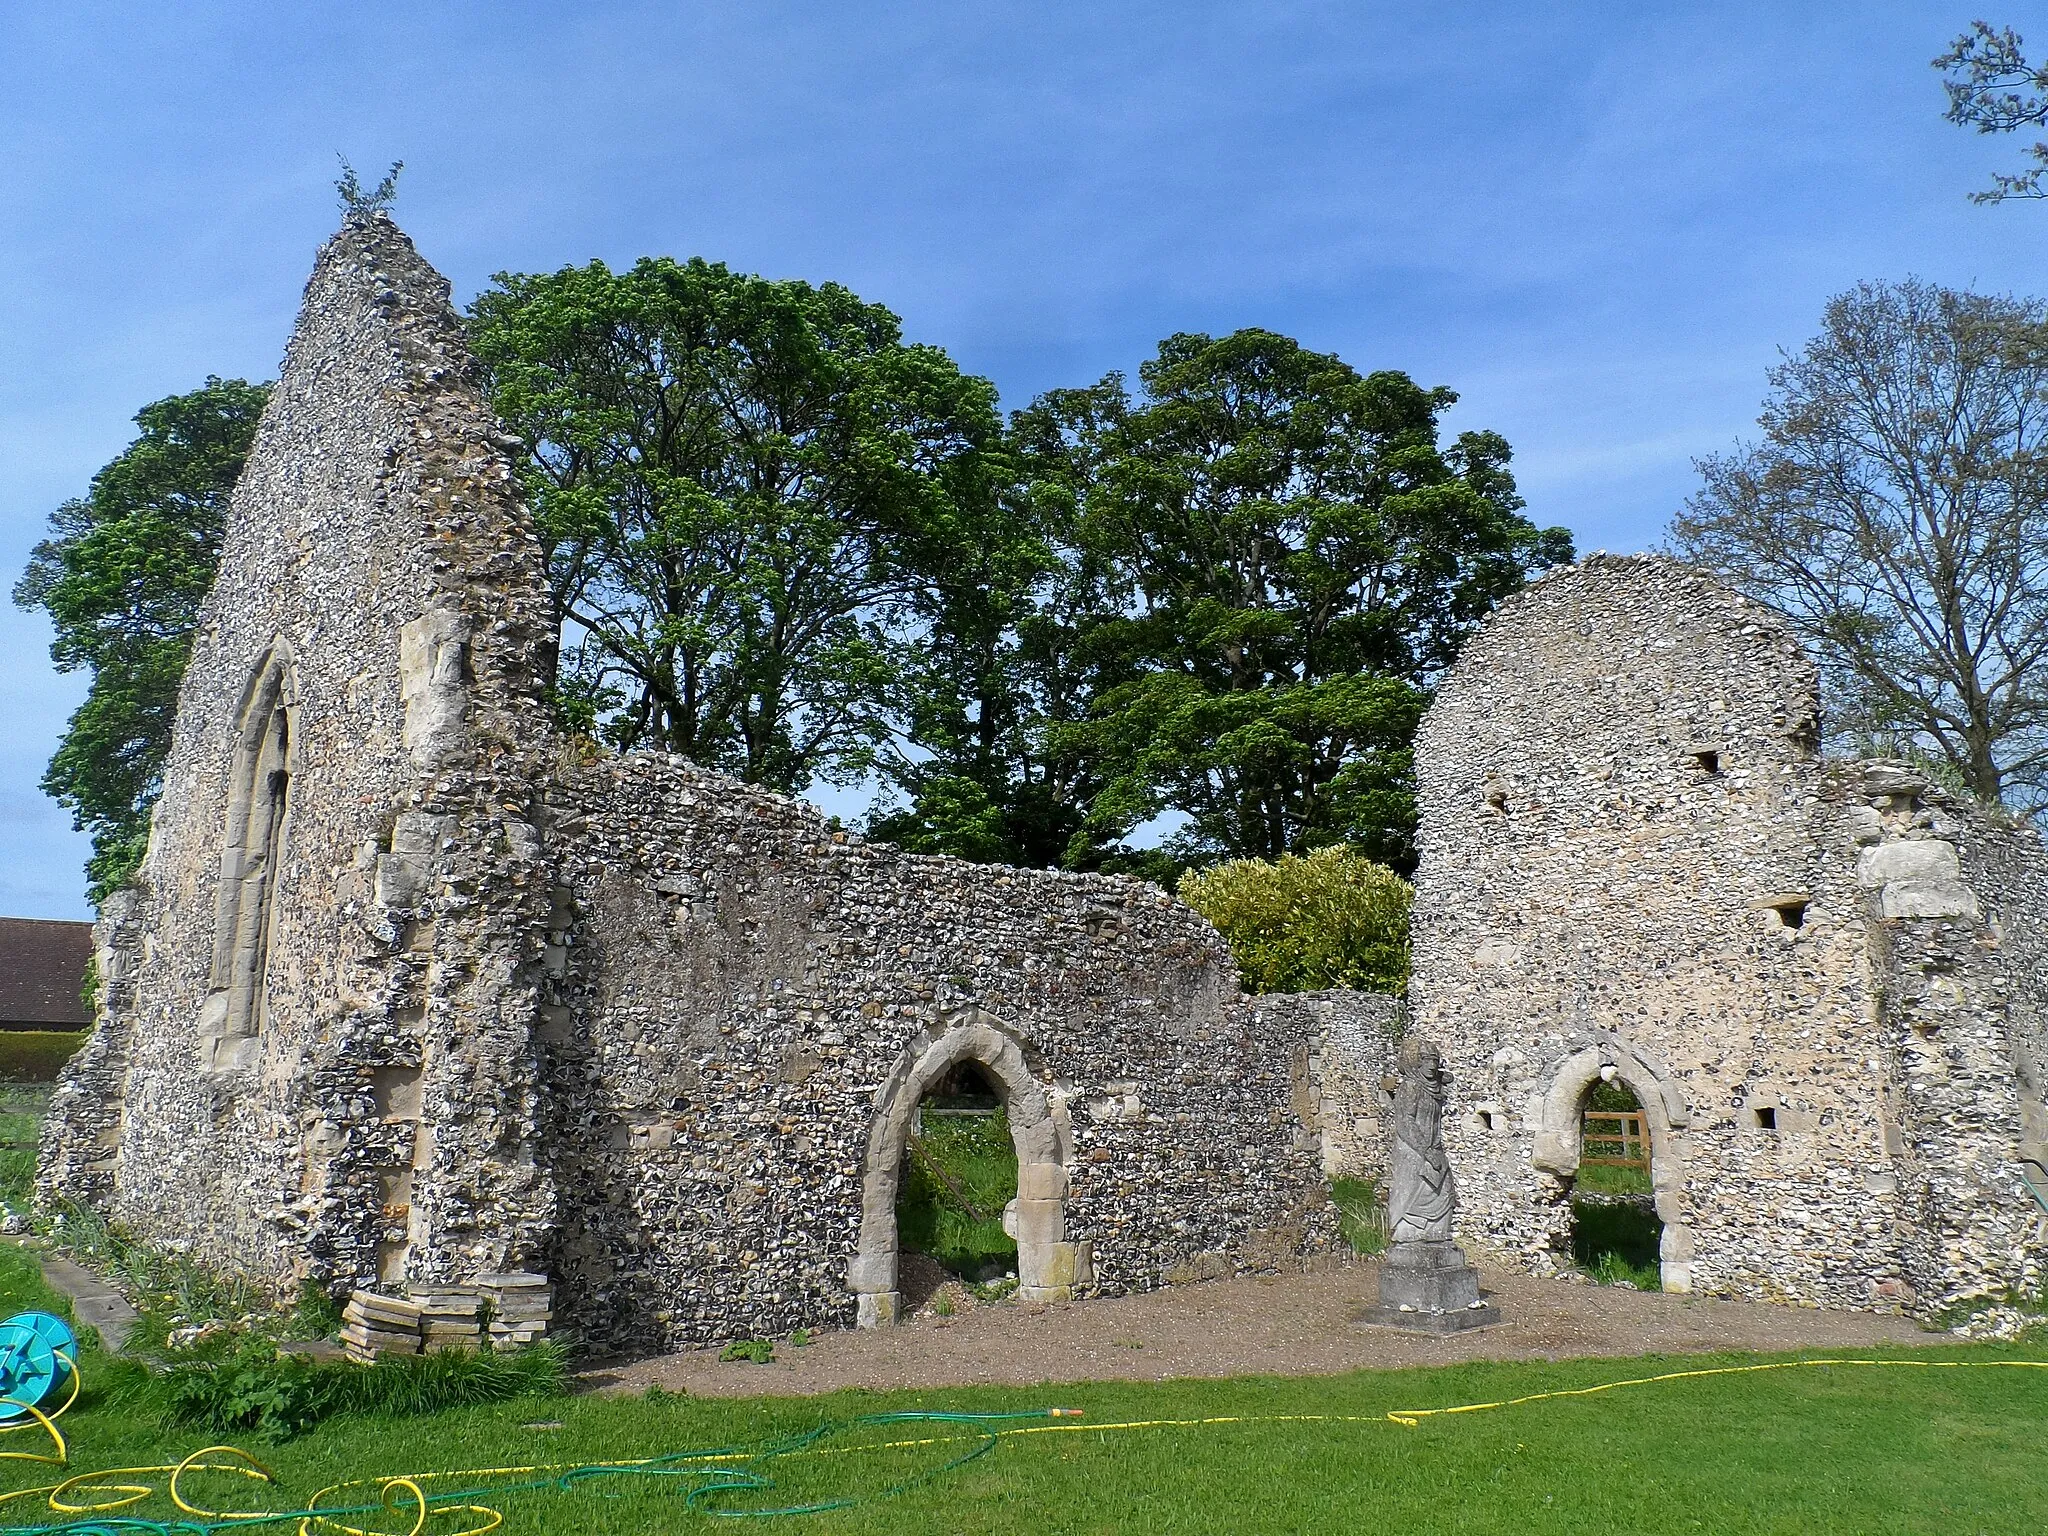 Photo showing: The ruin of St Etheldreda's, a medieval church at Chesfield, Hertfordshire. The statue is modern